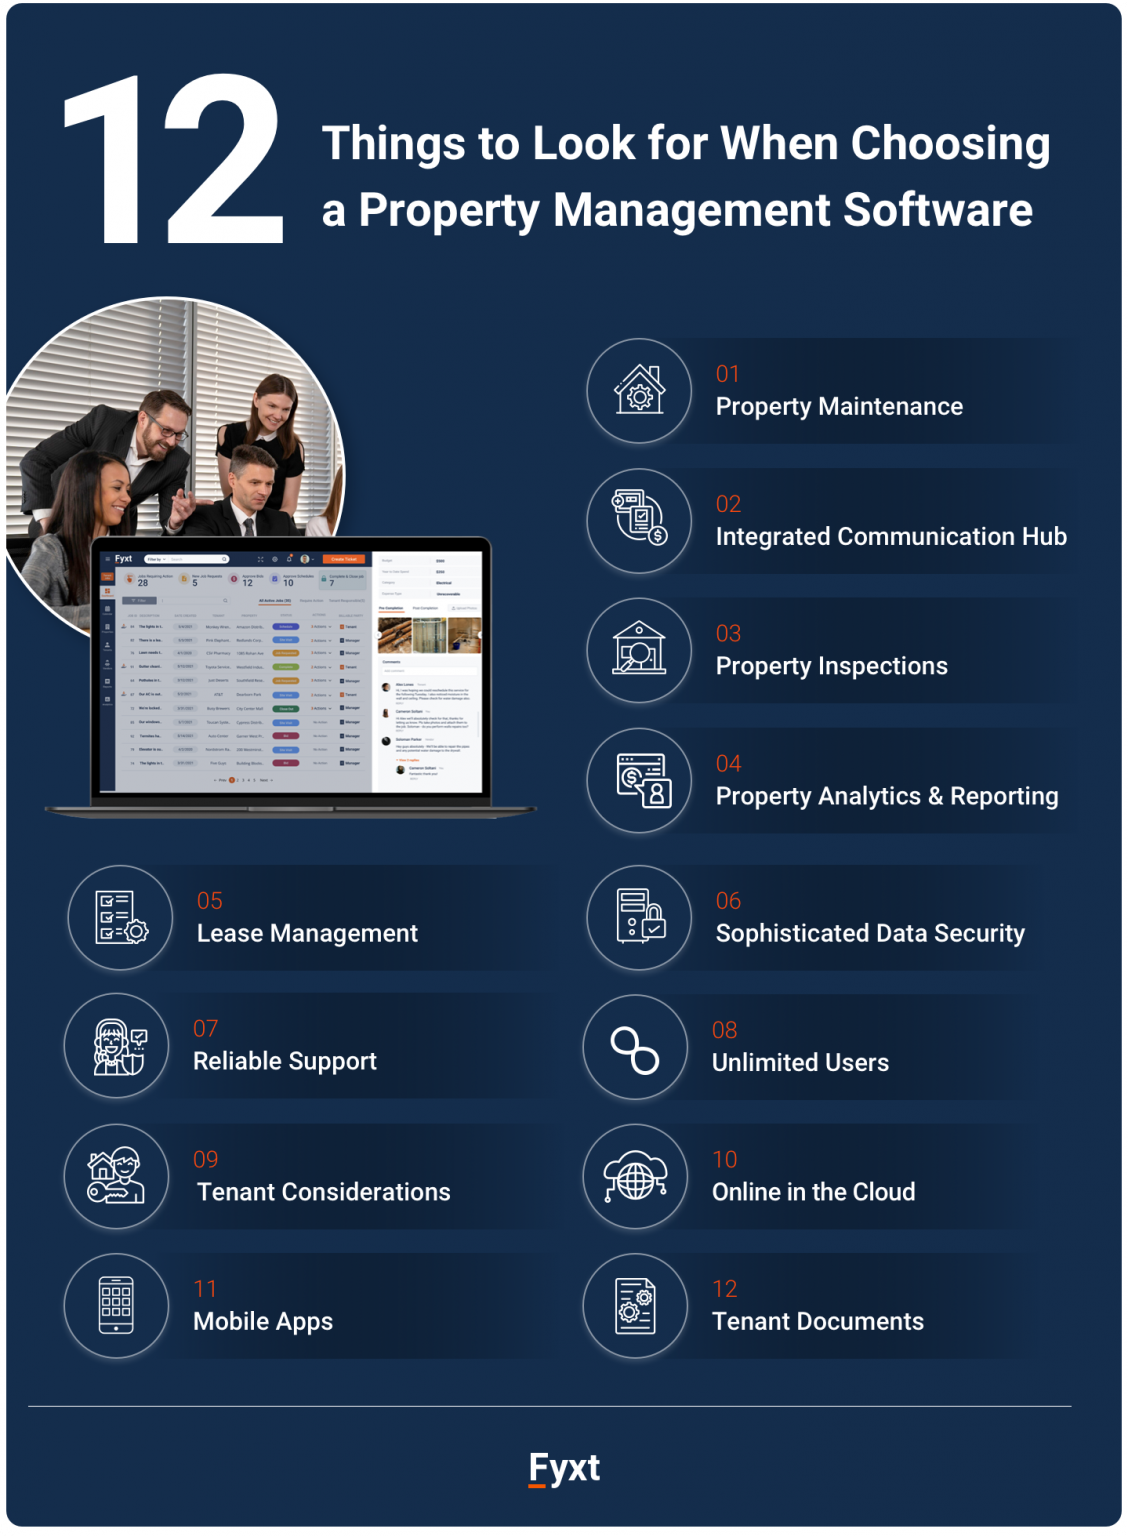 12 things to Look for when choosing commercial property and lease management software